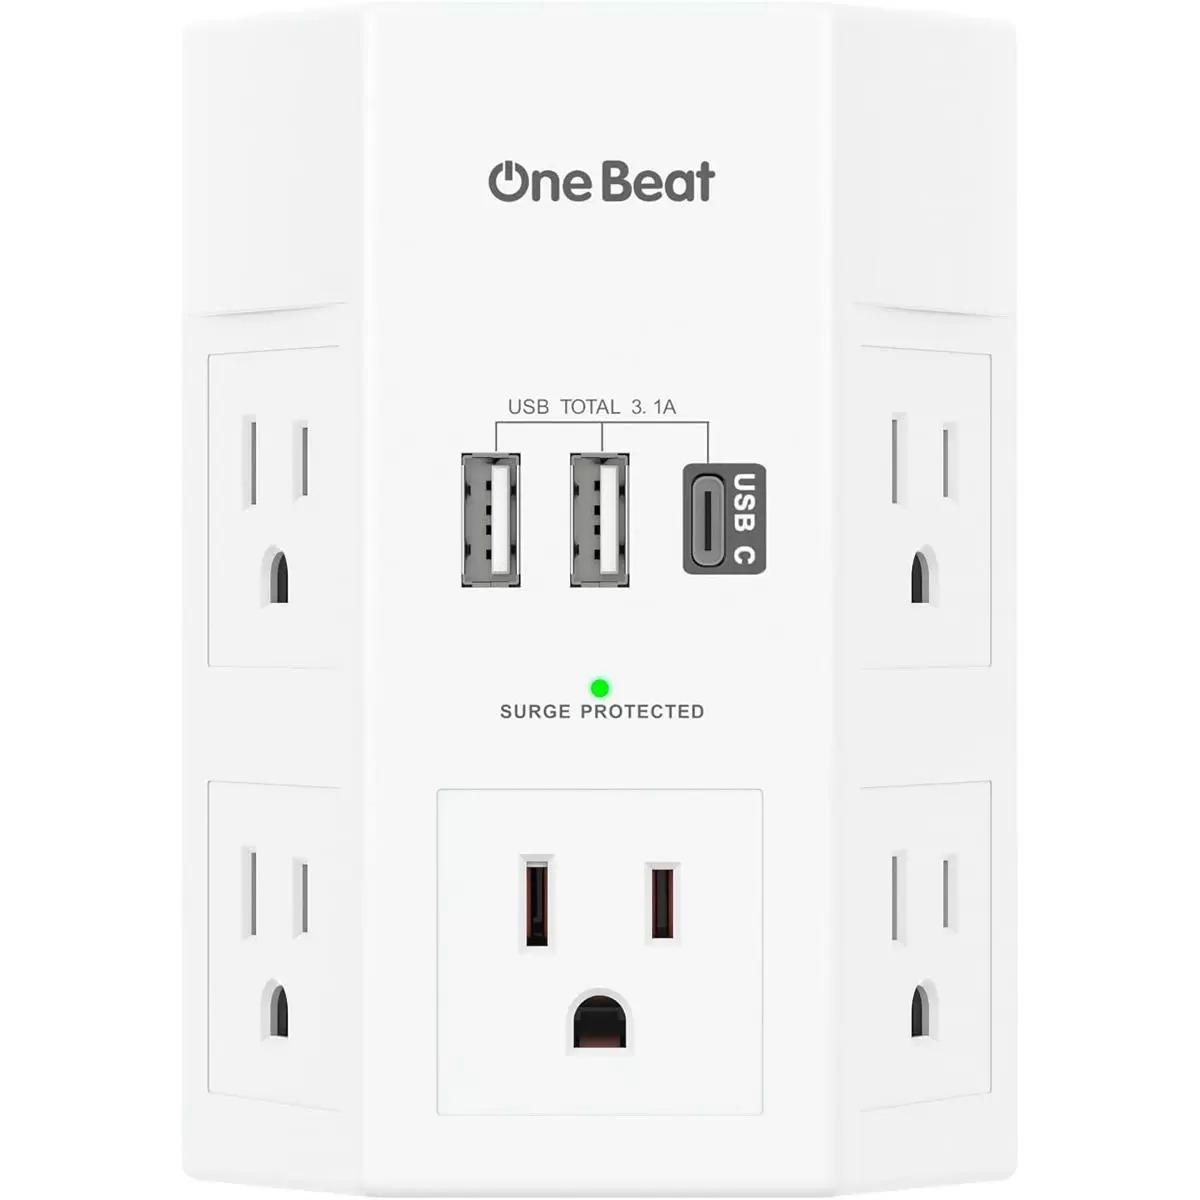 One Beat 5-Outlet + 3 USB Wall Surge Protector for $10.79